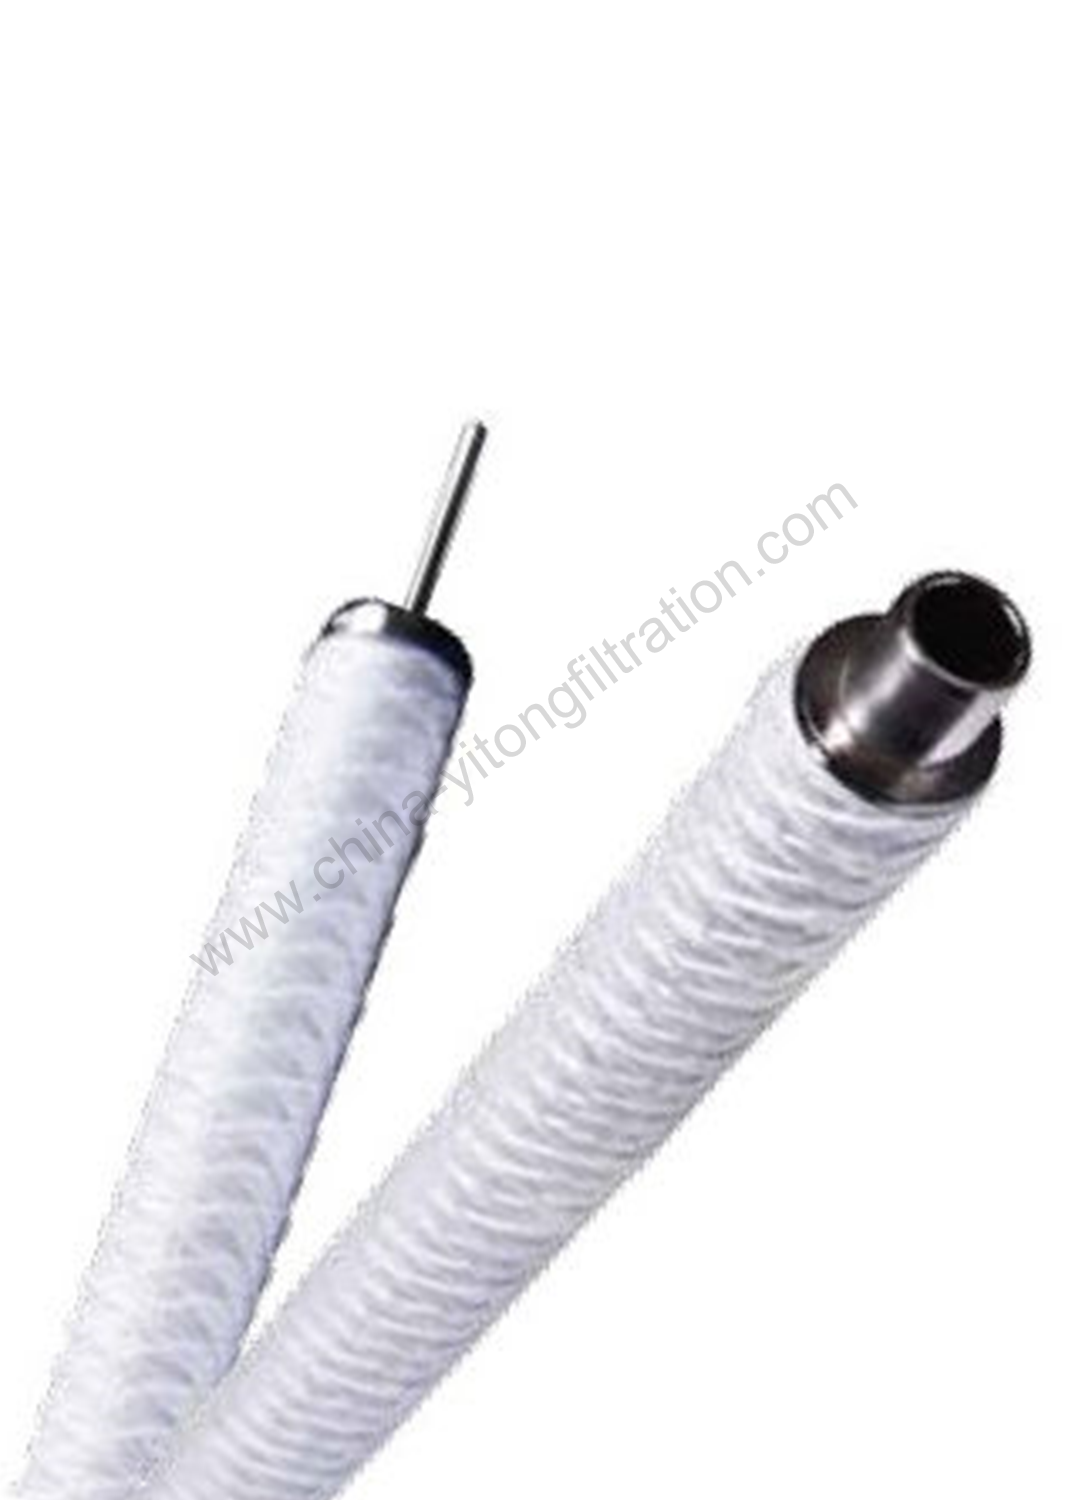 String Wound Condensate Treatment Filter Cartridge